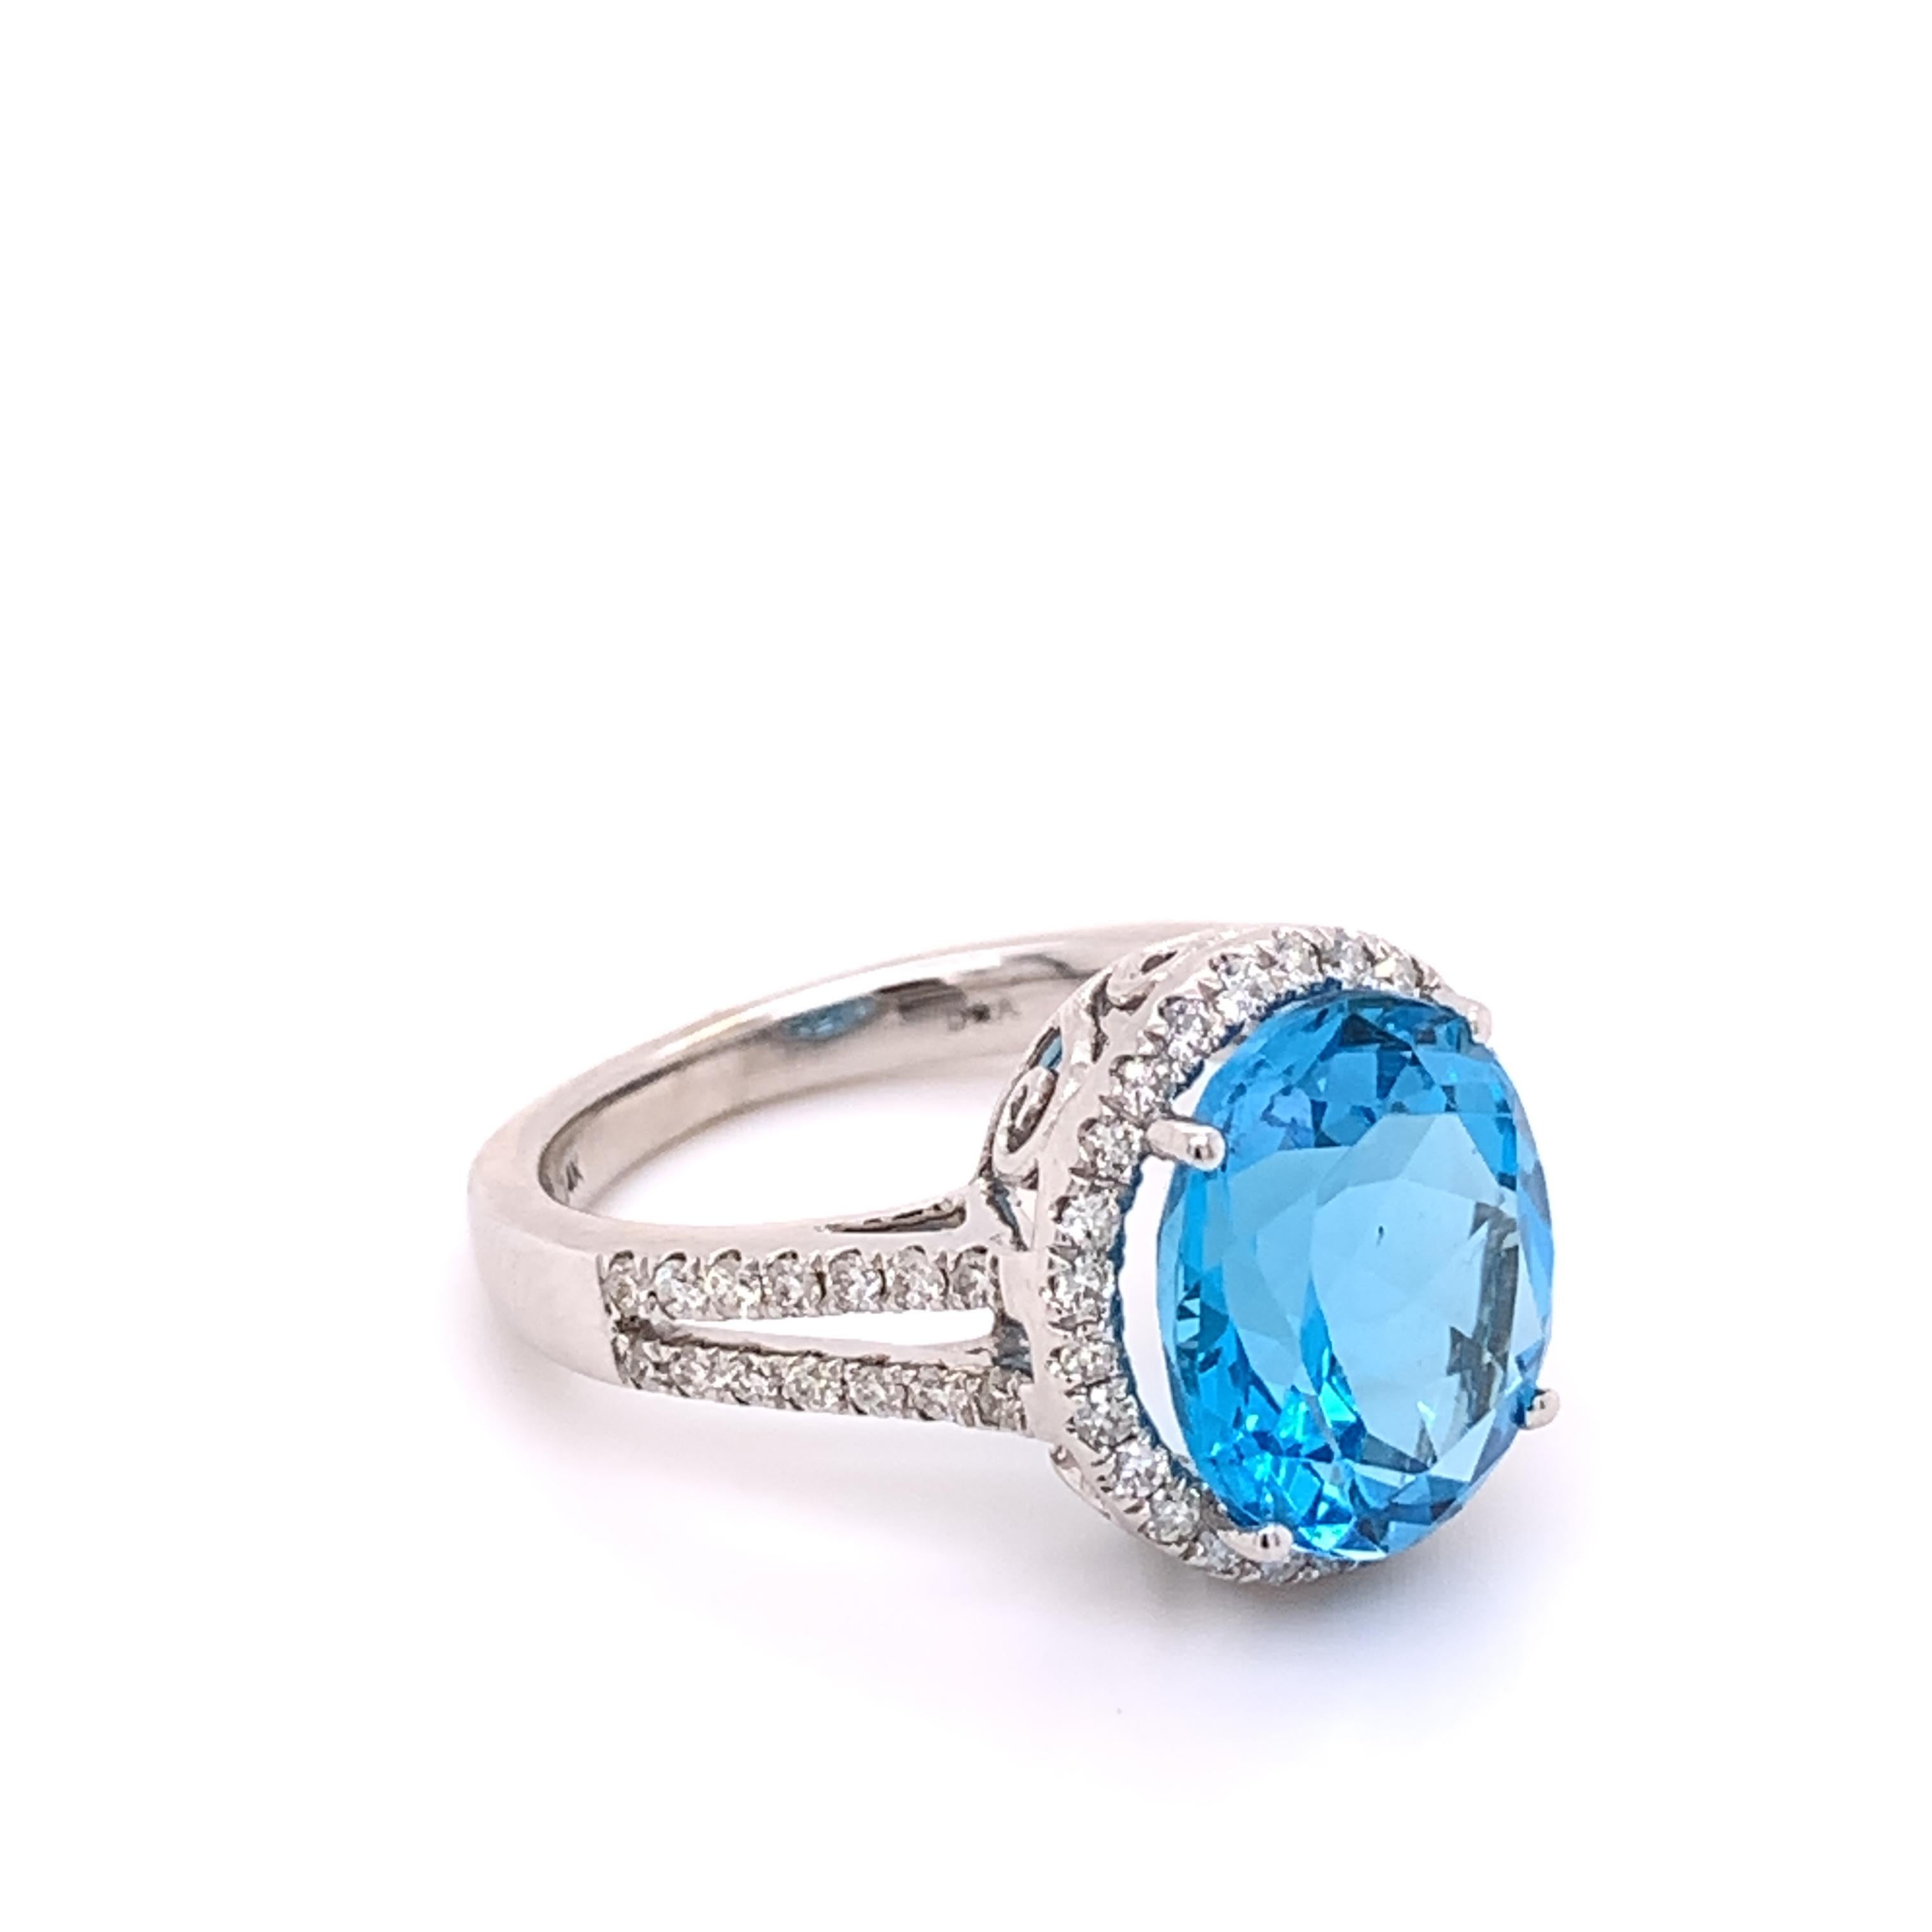 A beautiful ring crafted in luxurious 14 karat white gold with a natural 5.37 carat Blue Topaz stone measuring 11.80 x 9.75 x 6.30mm. This stone is transparent.

This ring also has a shimmering halo and a split shank set with 54 natural round